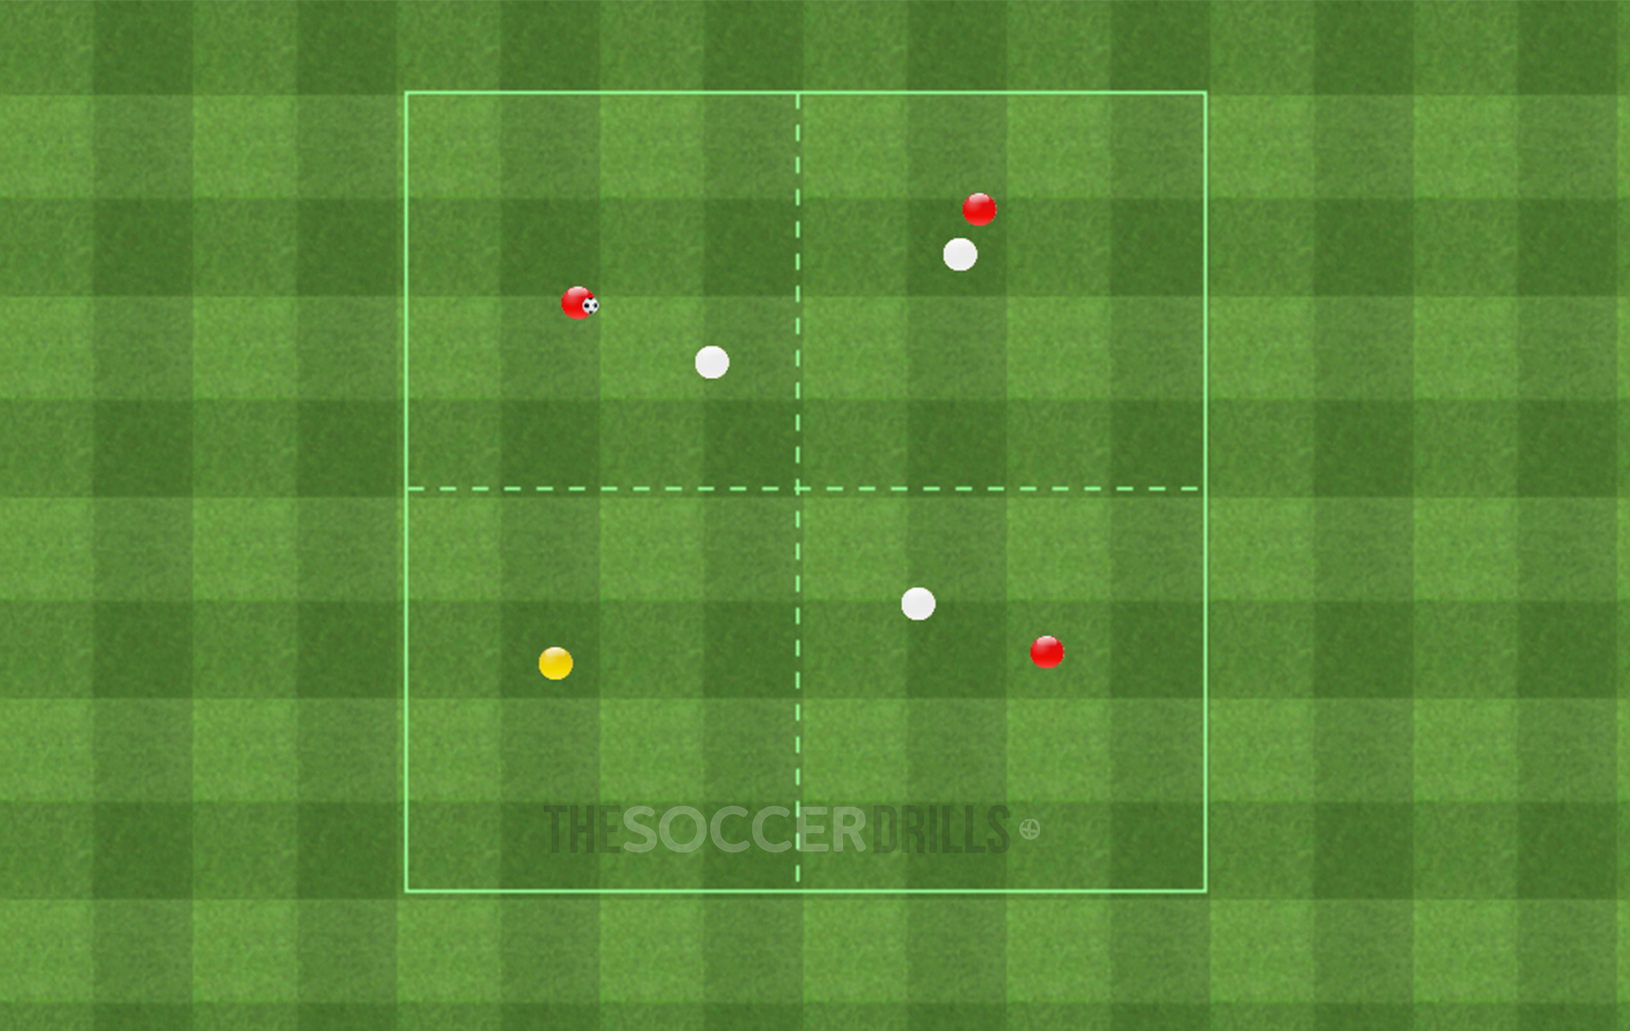 Small Sided Games, Soccer Drills for coaches, Soccer Drills for kds, Tactical Football Exercises, Tacical Soccer Drills, Drills for counterattack, Possesion possesion drills soccer, Small-Sided Soccer Games,